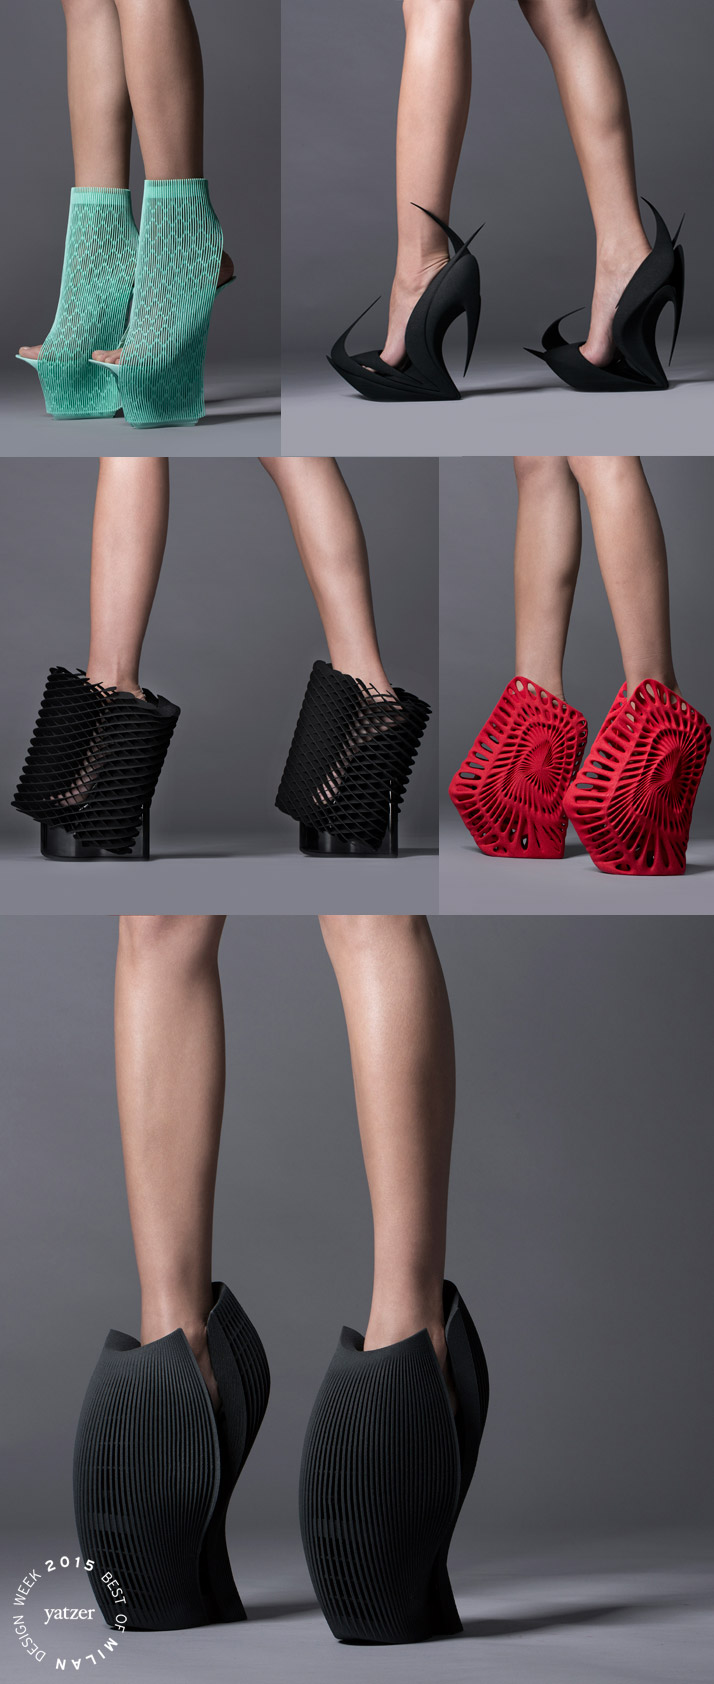 The Re-Inventing Shoes project by United Nude and 3D systems. Ben van Berkel (UNStudio), Zaha Hadid, Ross Lovegrove, Fernando Romero and Michael Young are exploring and challenging 3D printing technology bydesigning 3D printed ladies high heels.